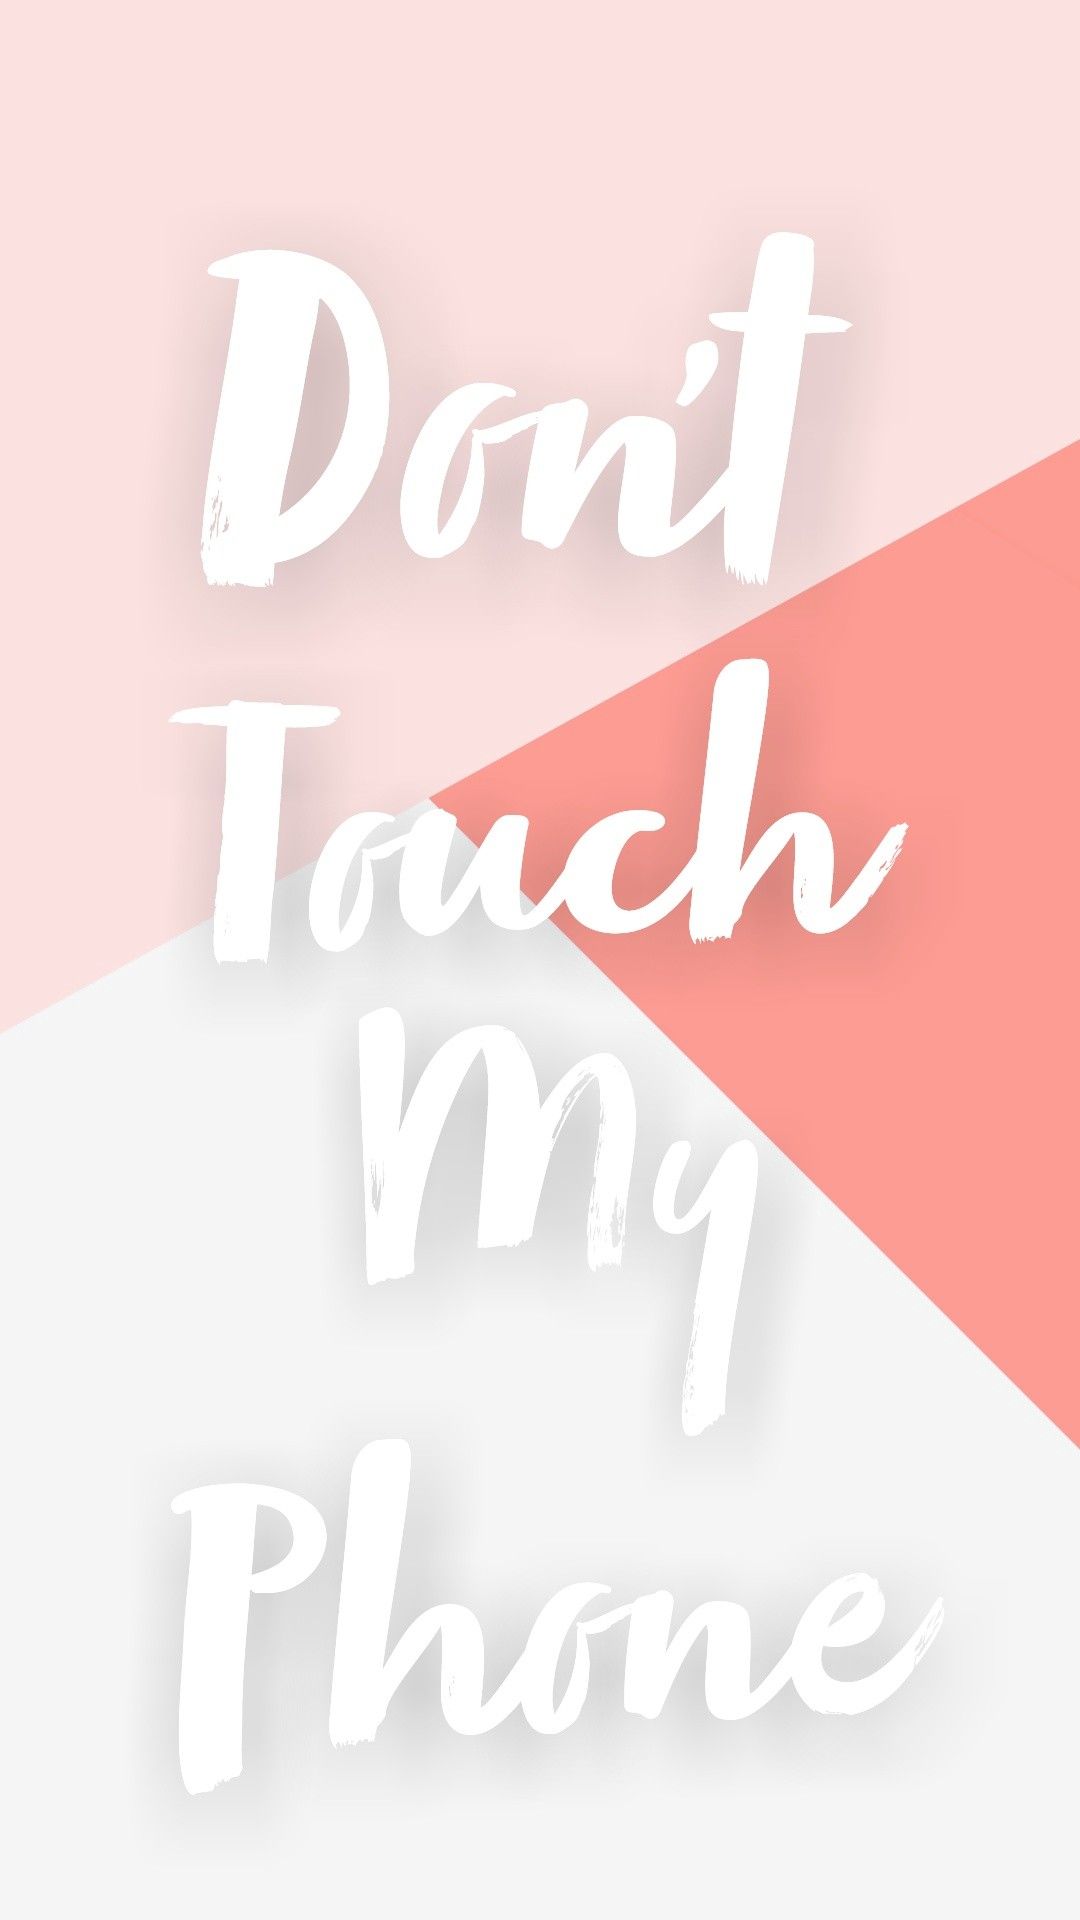 Don't touch my phone wallpaper. Dont touch my phone wallpaper, Dont touch my phone wallpaper, iPhone wallpaper quotes funny